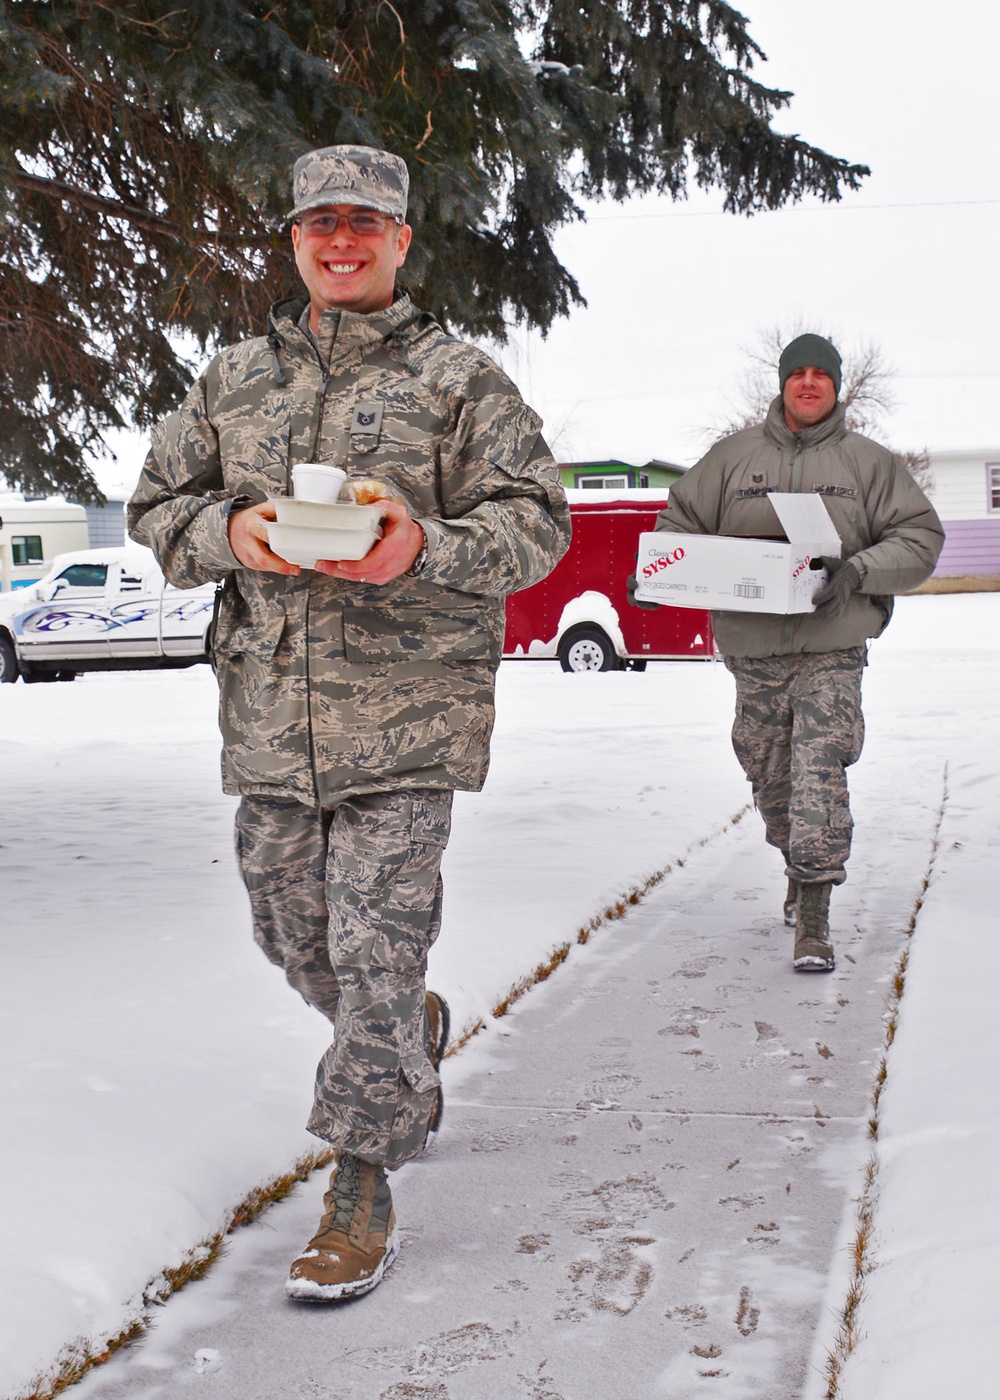 Airmen end year delivering holiday cheer